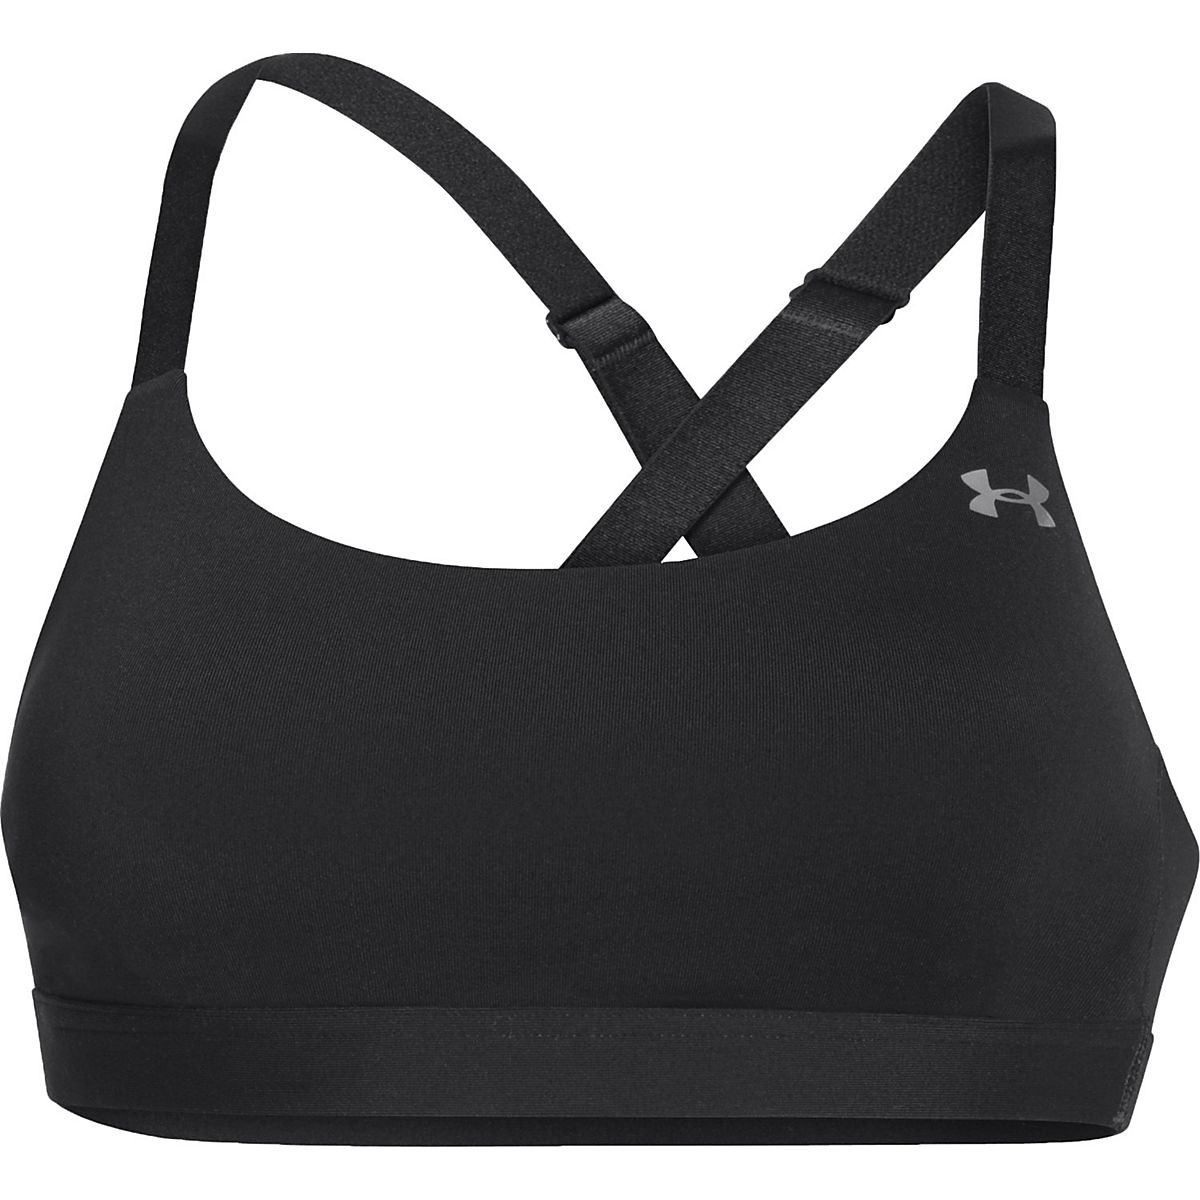 Under Armour Women's Eclipse Bra | Free Shipping at Academy